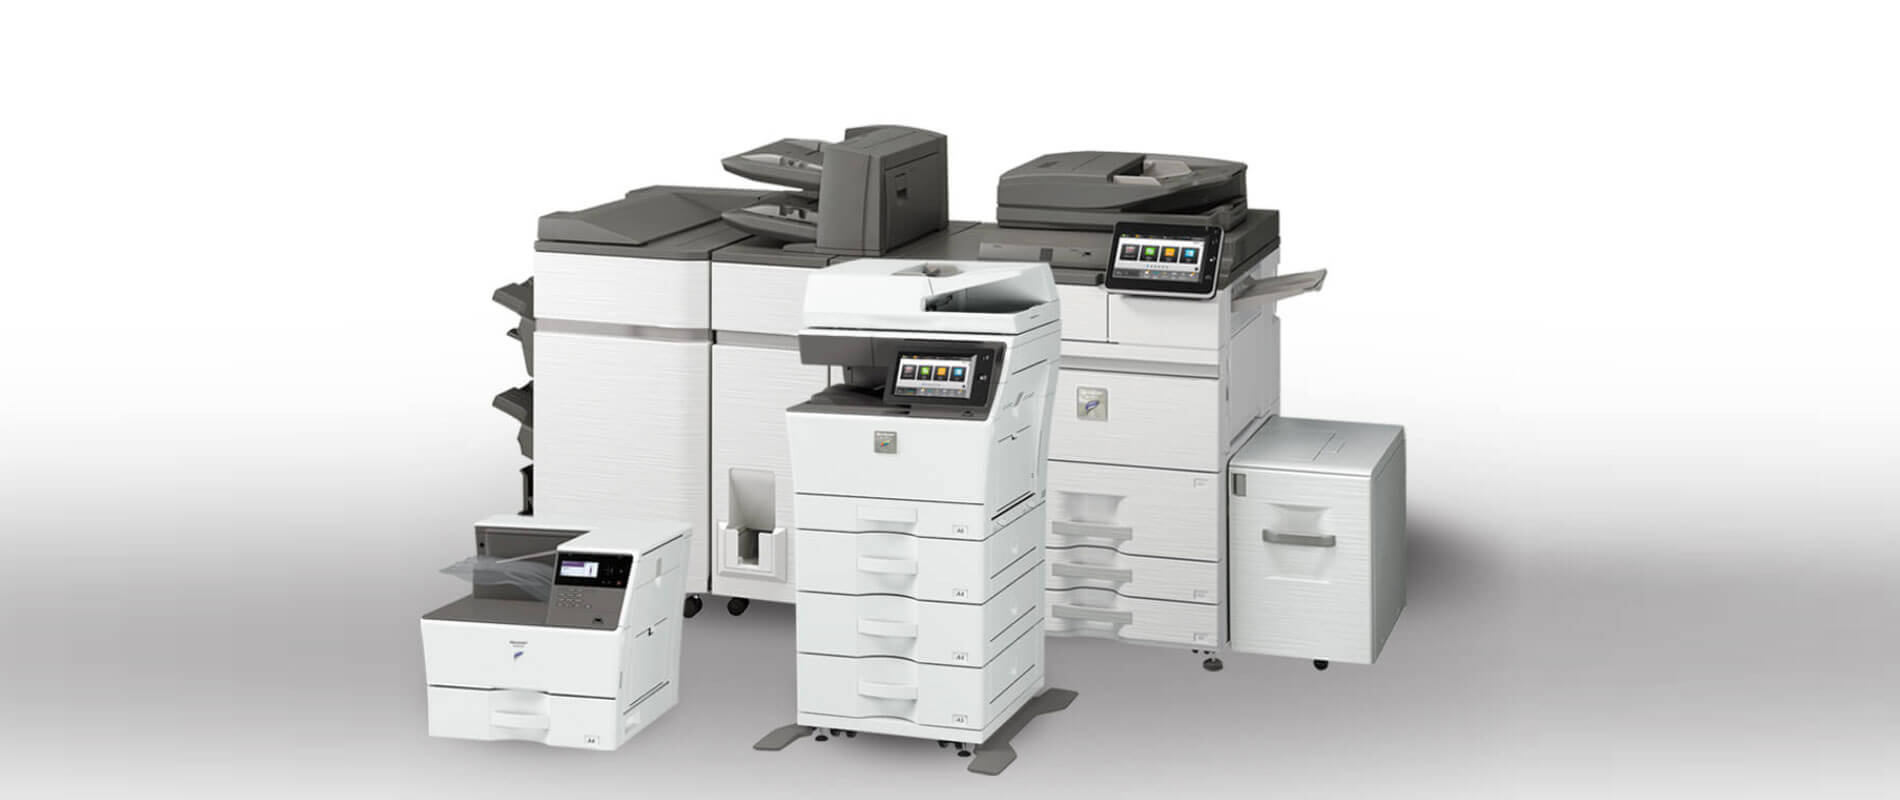 The Advantages of Renting a Printer, Copier, or Scanner